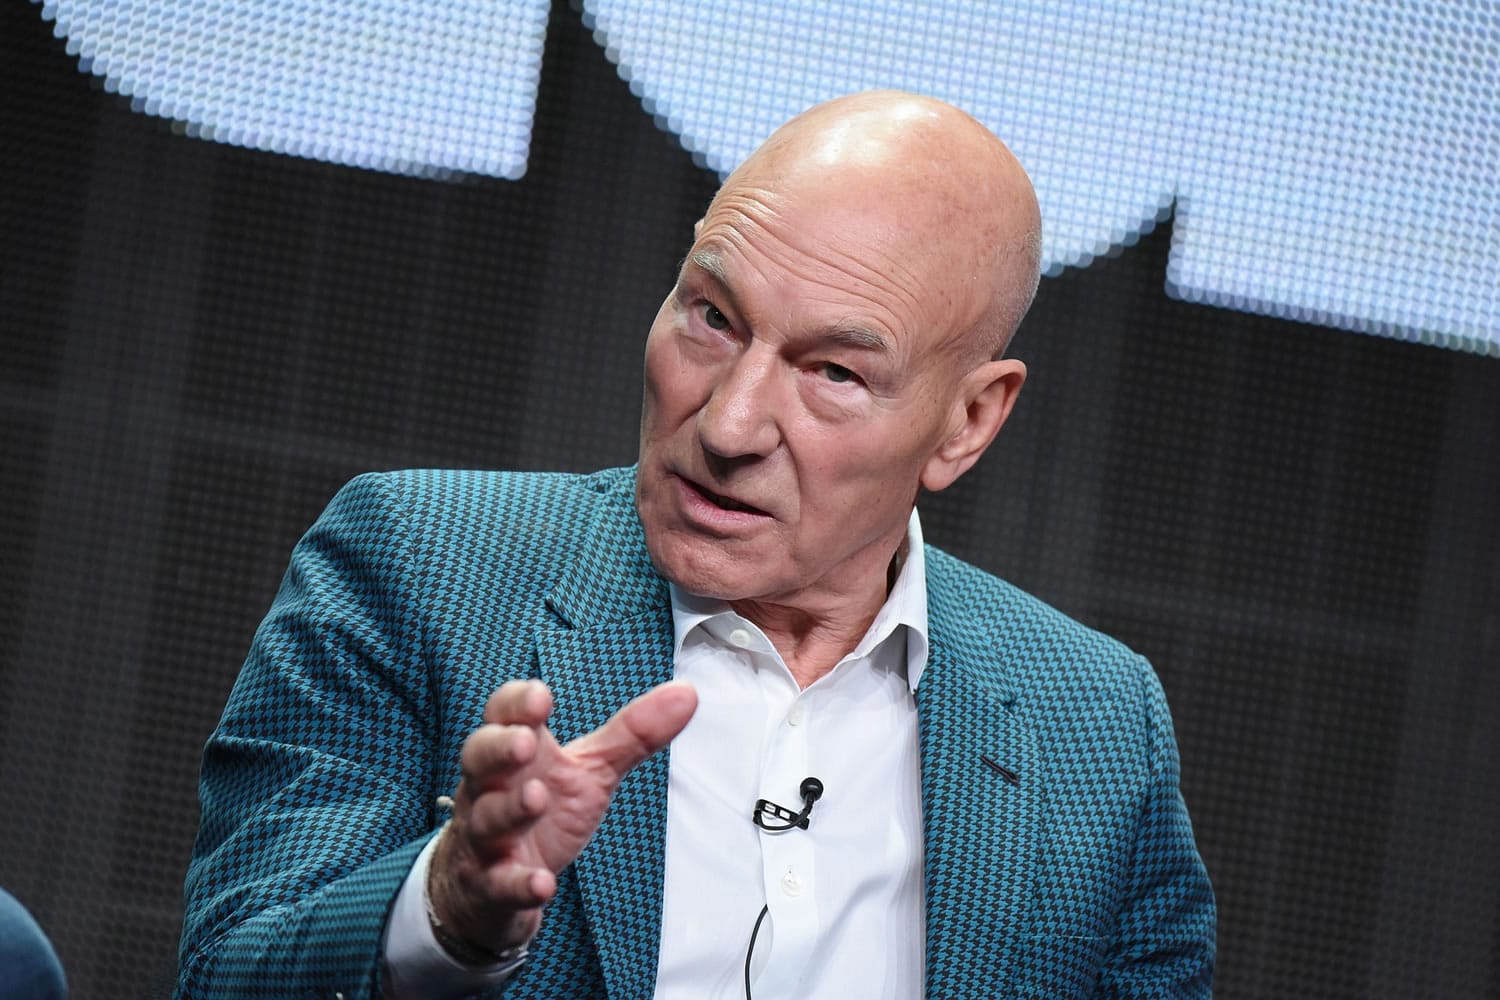 Patrick Stewart speaks onstage during the &quot;Blunt Talk&quot; panel July 31 at the Starz 2015 Summer TCA Tour held at the Beverly Hilton Hotel in Beverly Hills, Calif.